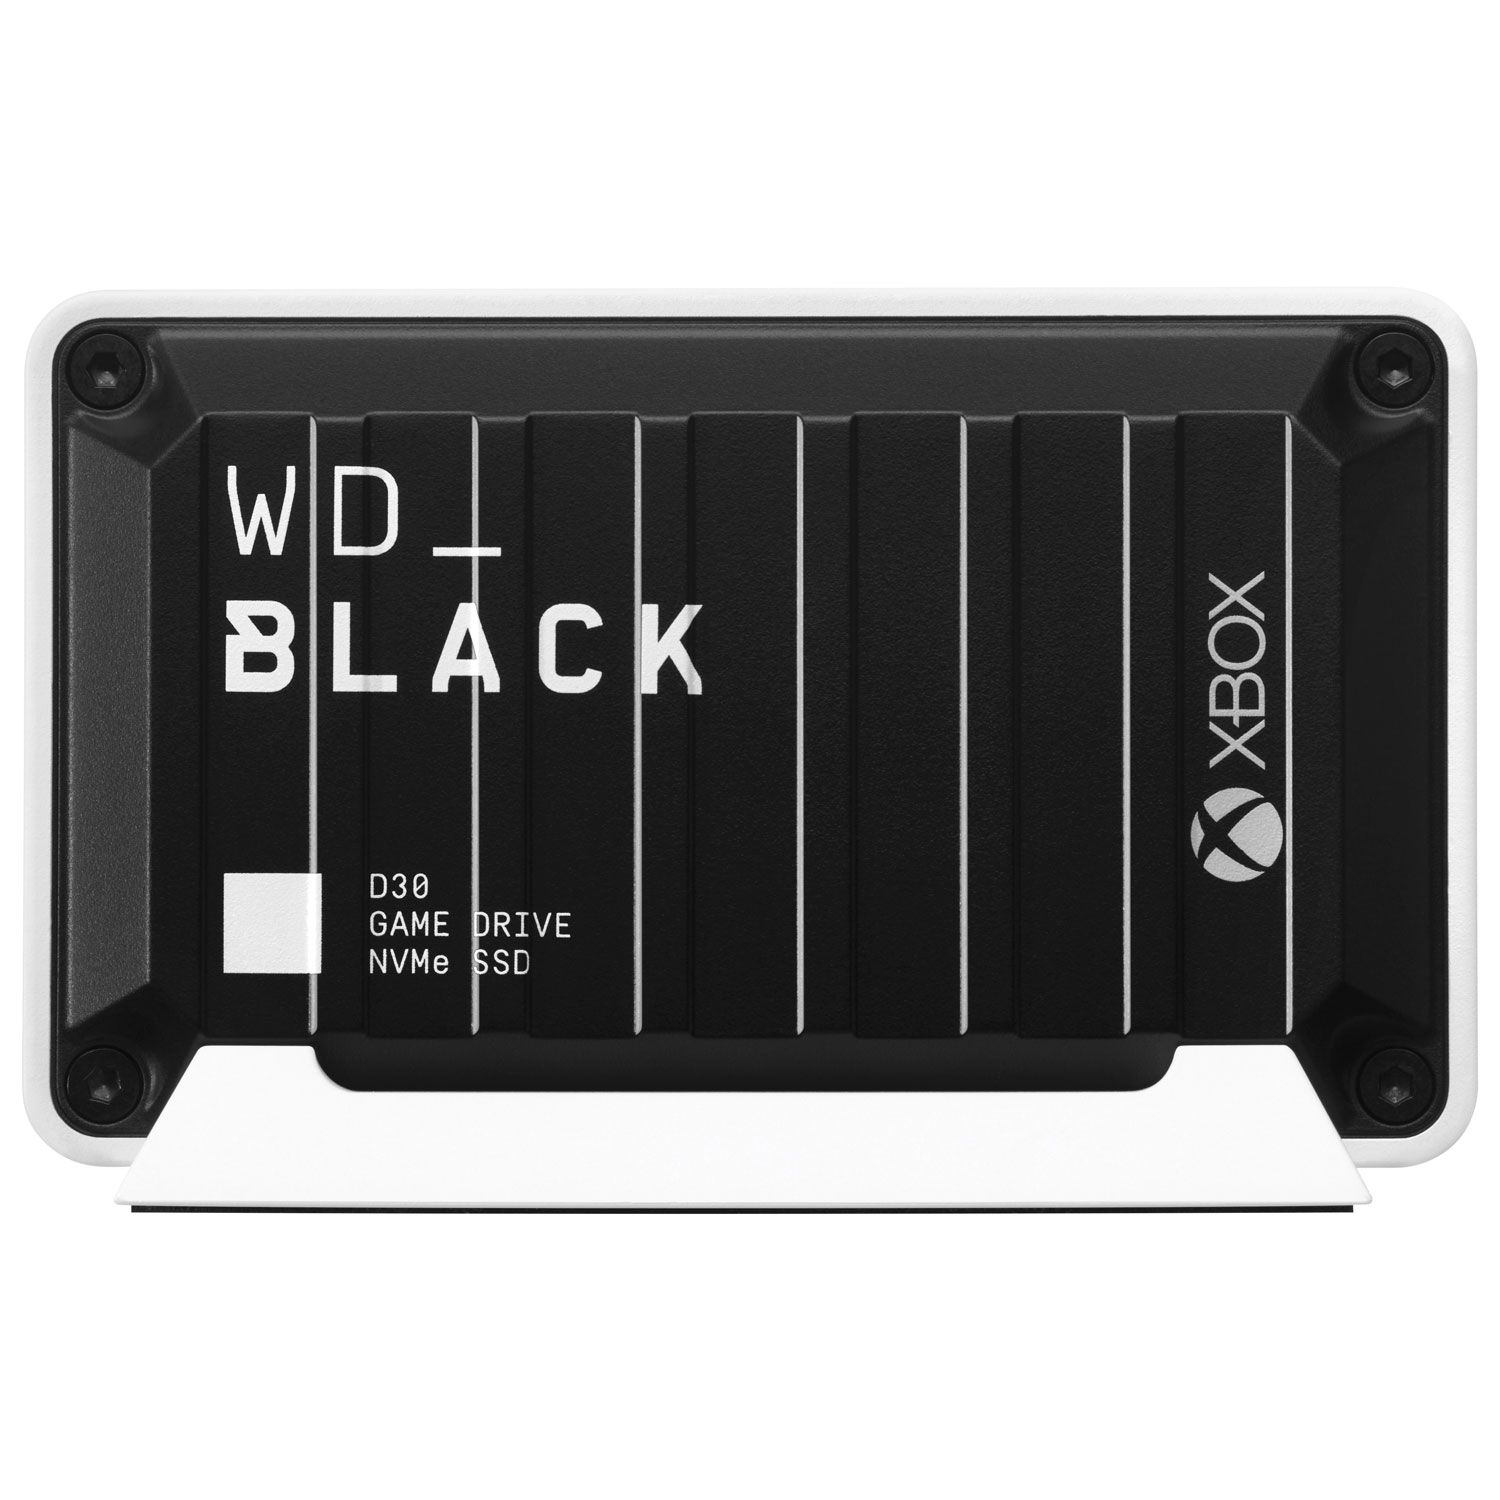 WD_Black D30 Game Drive 500GB USB-C External Solid State Drive for Xbox (WDBAMF5000ABW-WESN)